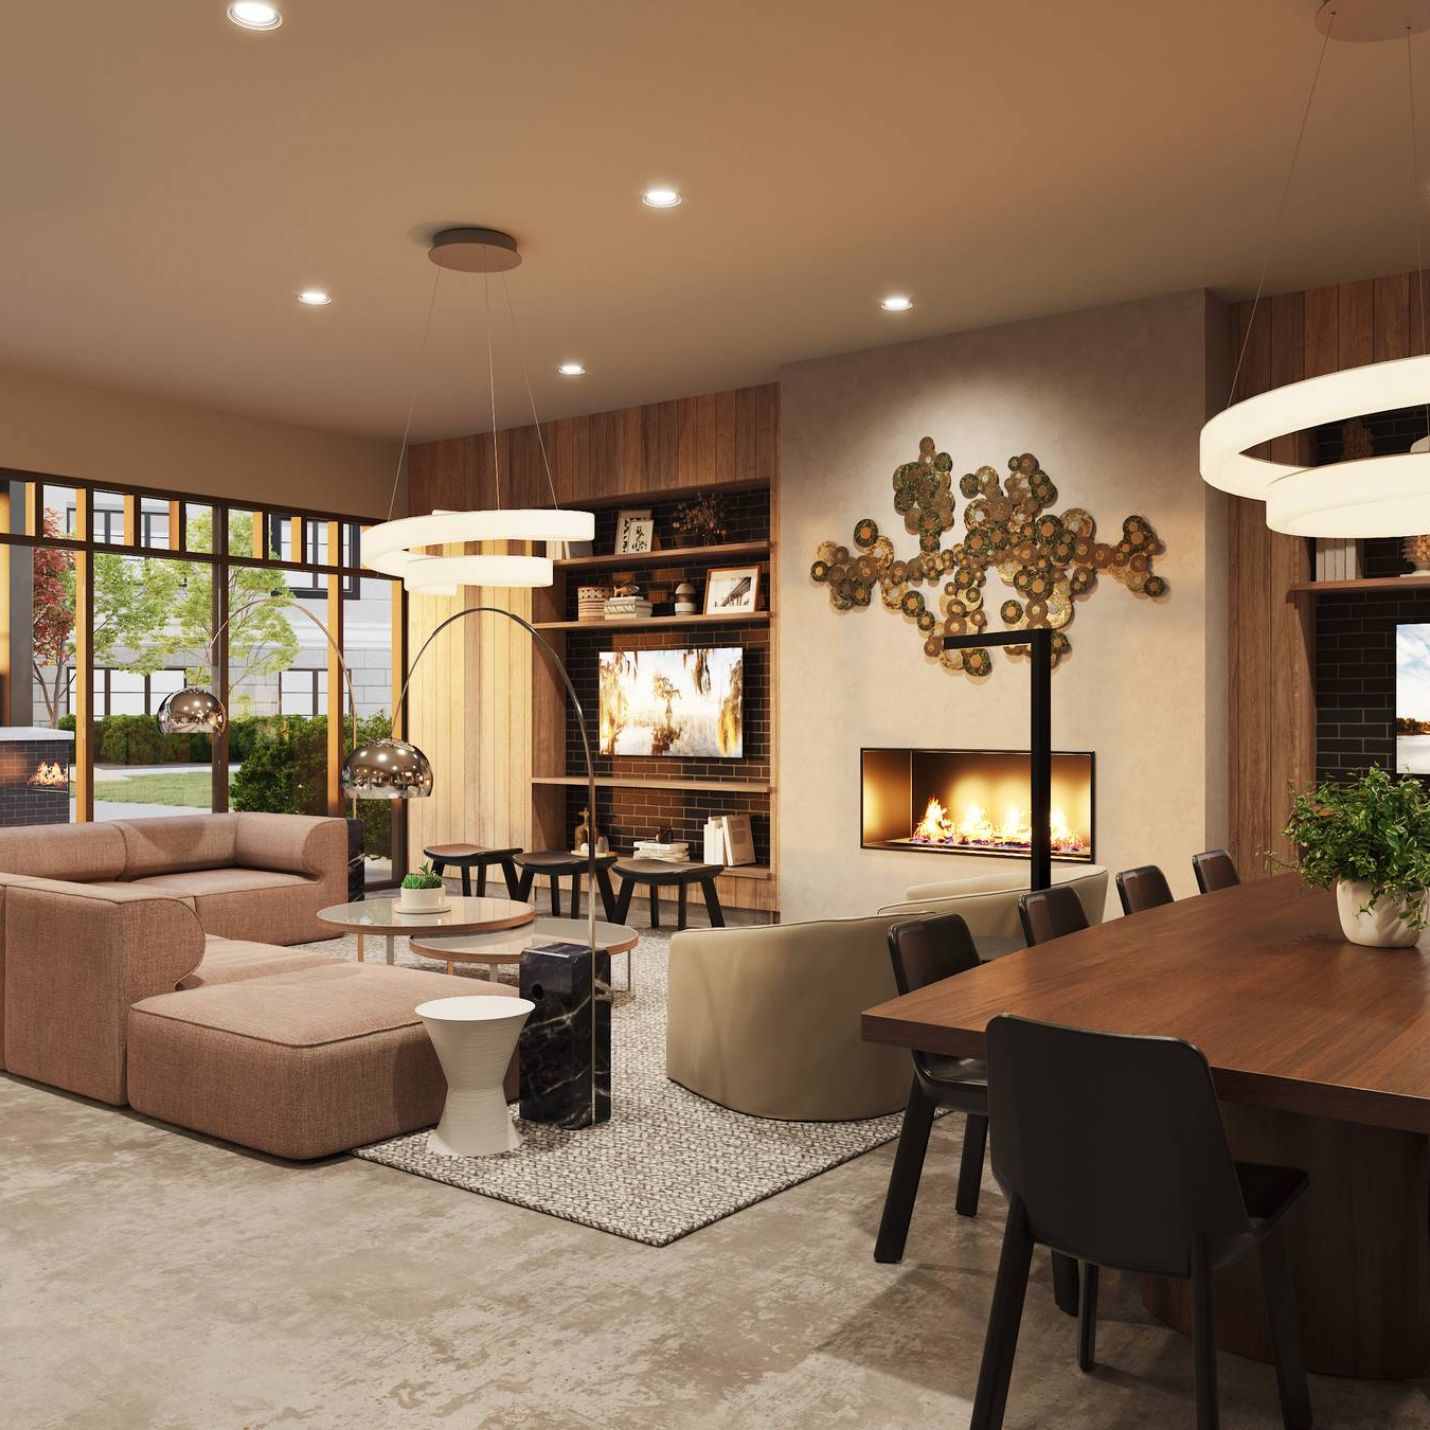 Leawood Village apartments community lounge with couches and coffee tables and beautiful finishes